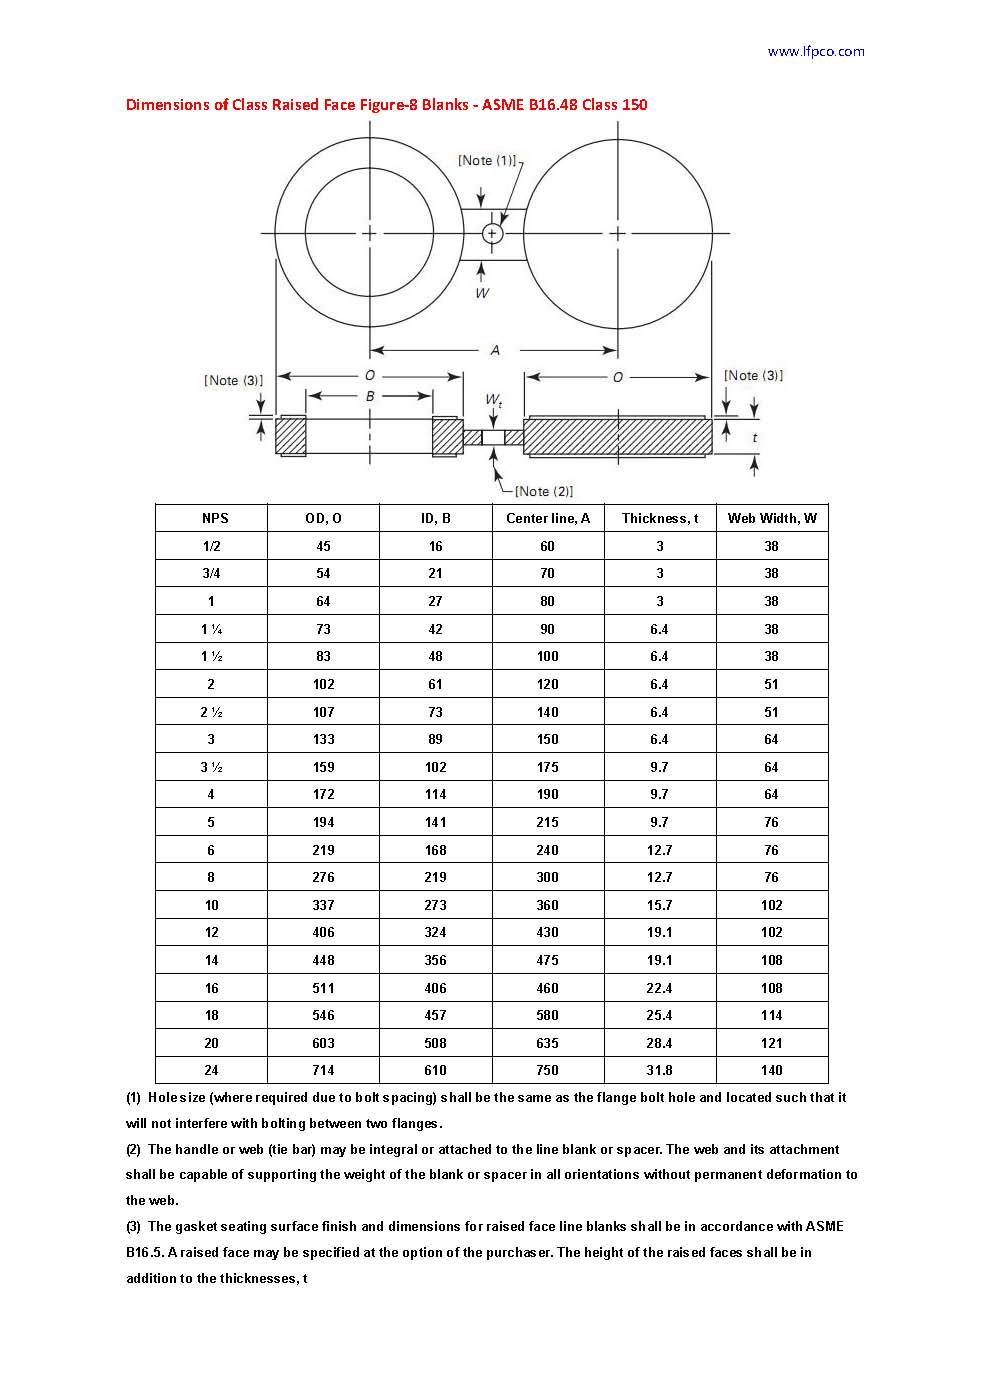 Dimensions of raised face figure 8 blanks ASME B16.48_class150